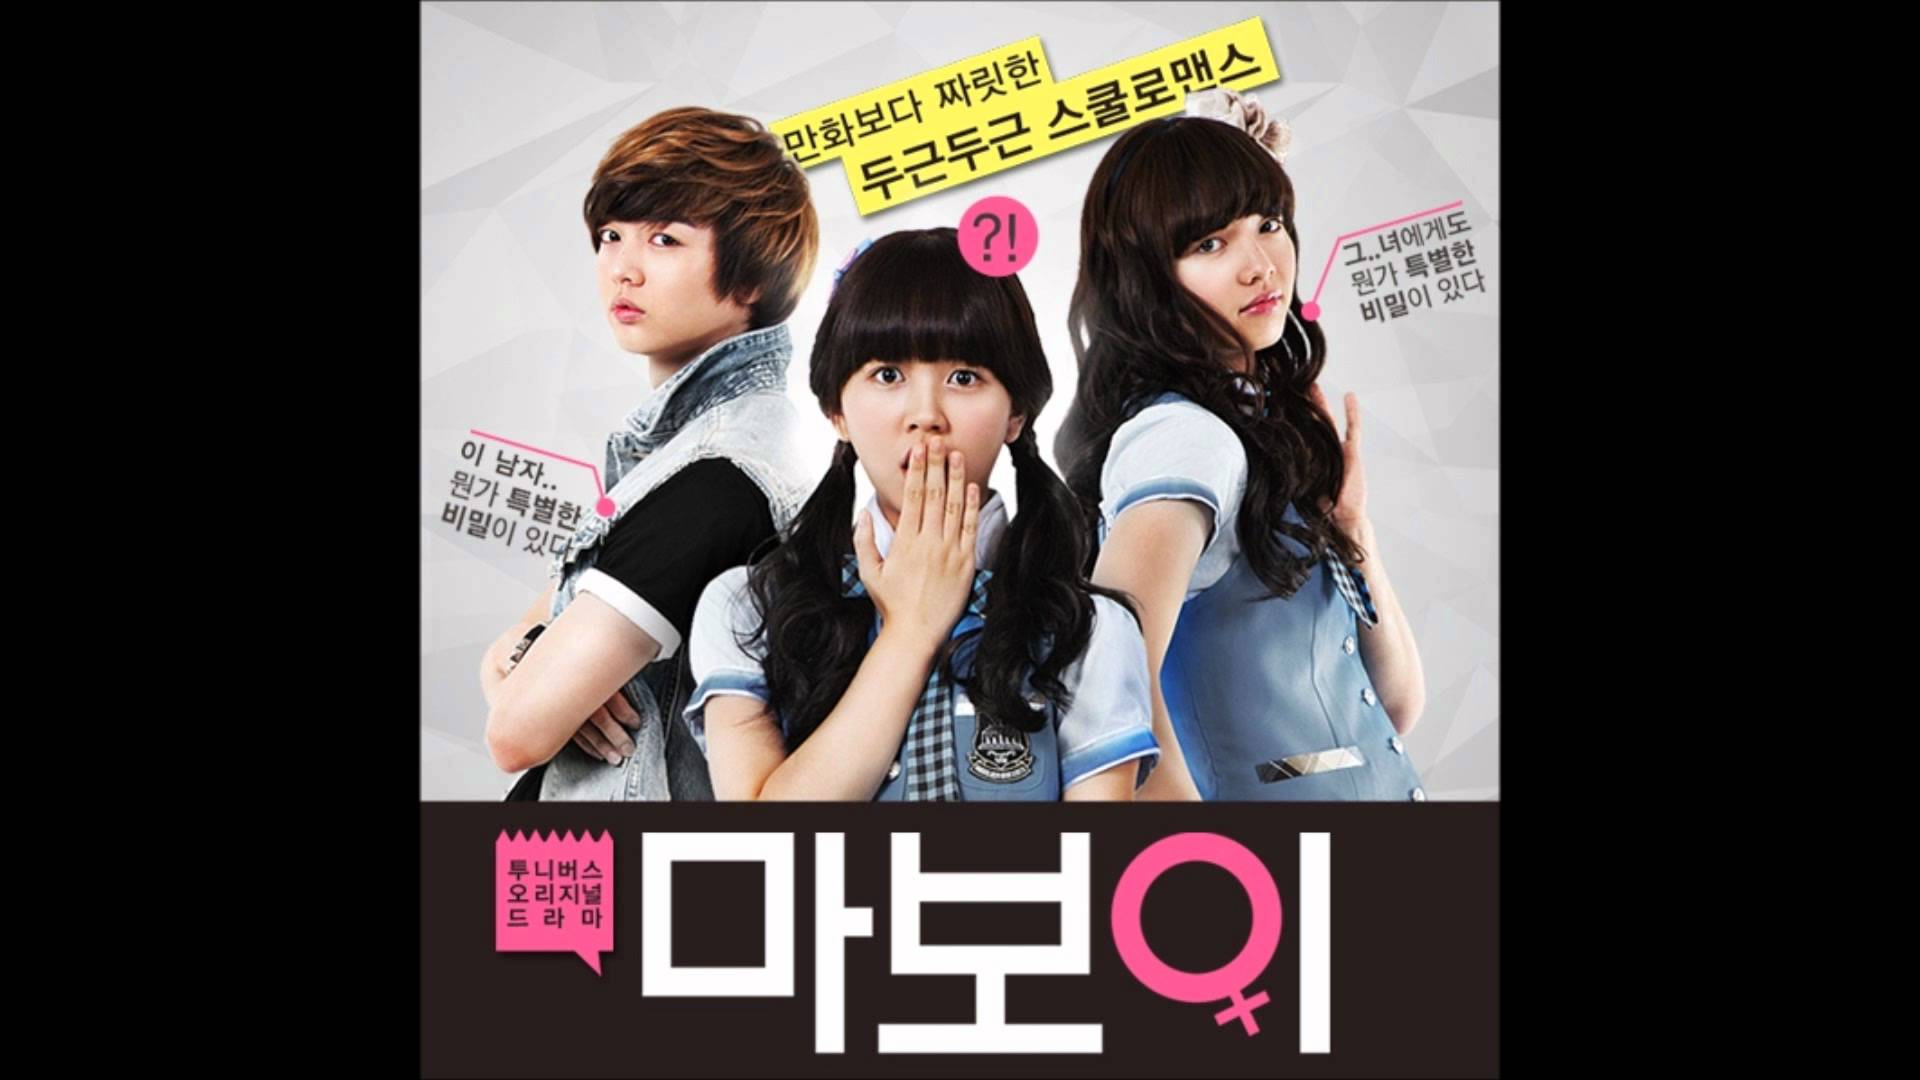 AUDIO] CHI CHI - 핑크렌즈 (Pink Lens) (My Boy Main OST) - YouTube